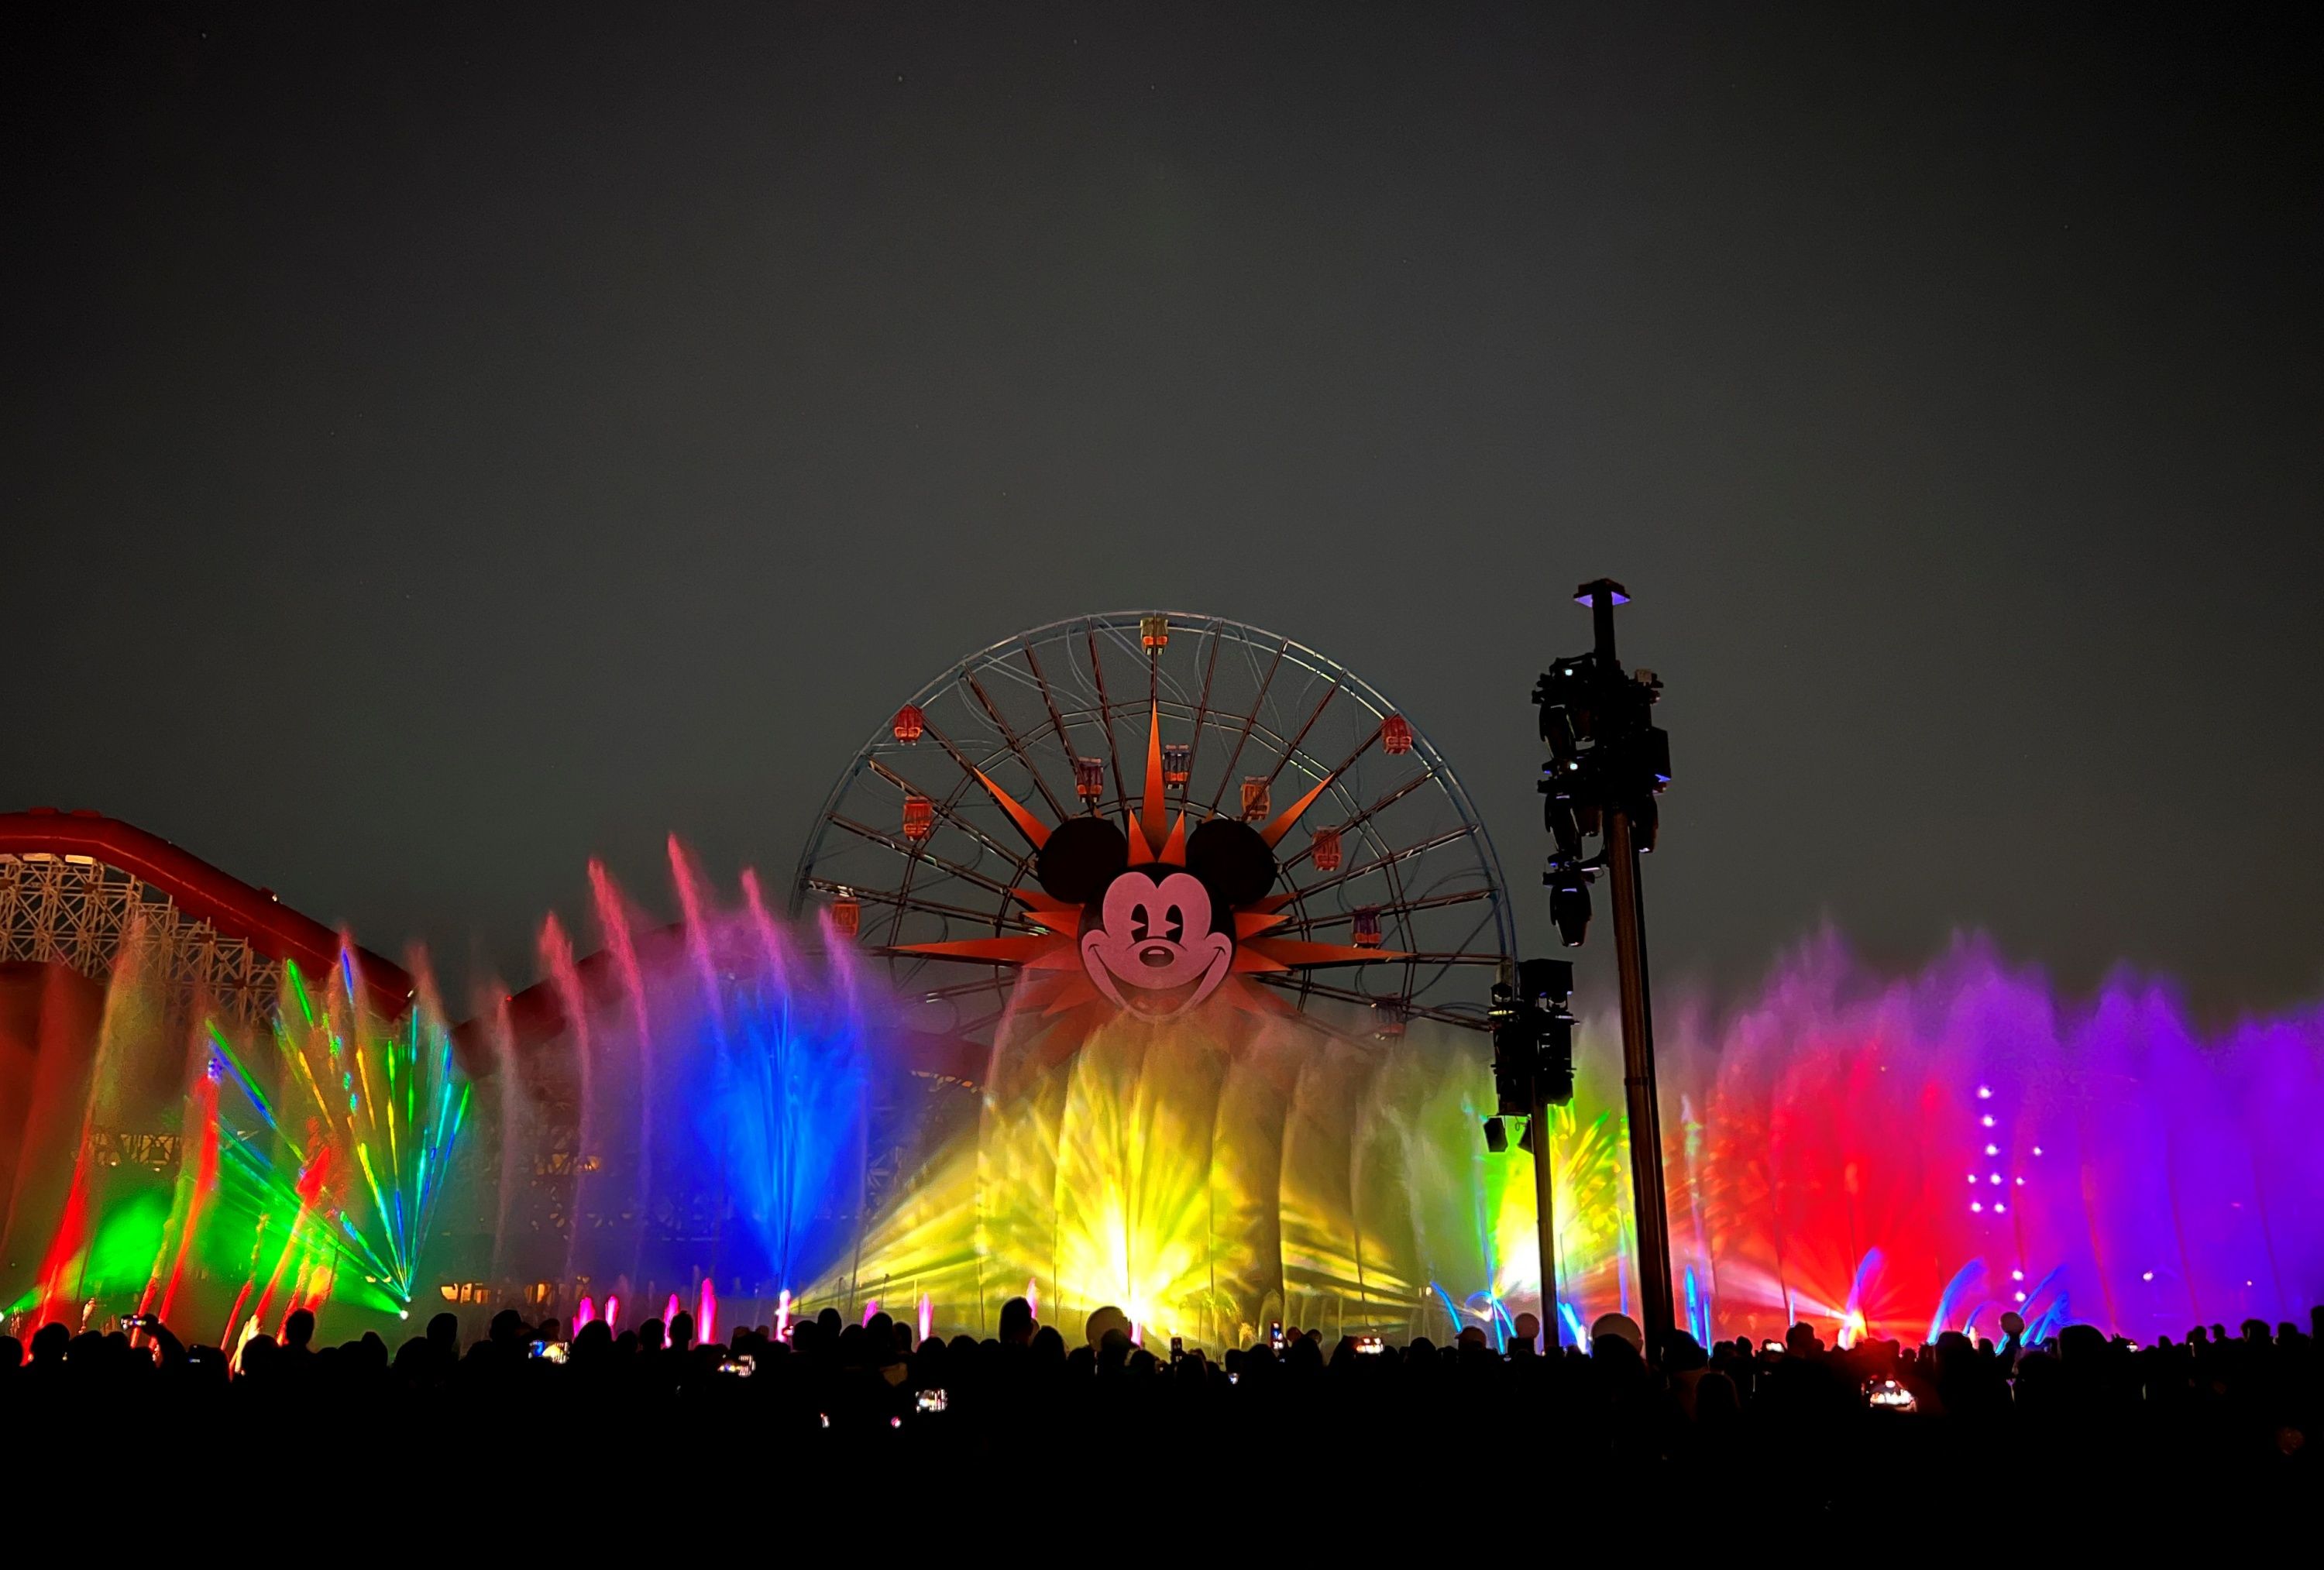 World of Color - ONE nighttime spectacular for the Disney100 Celebration at the Disneyland Resort in Anaheim, Calif. in 2023